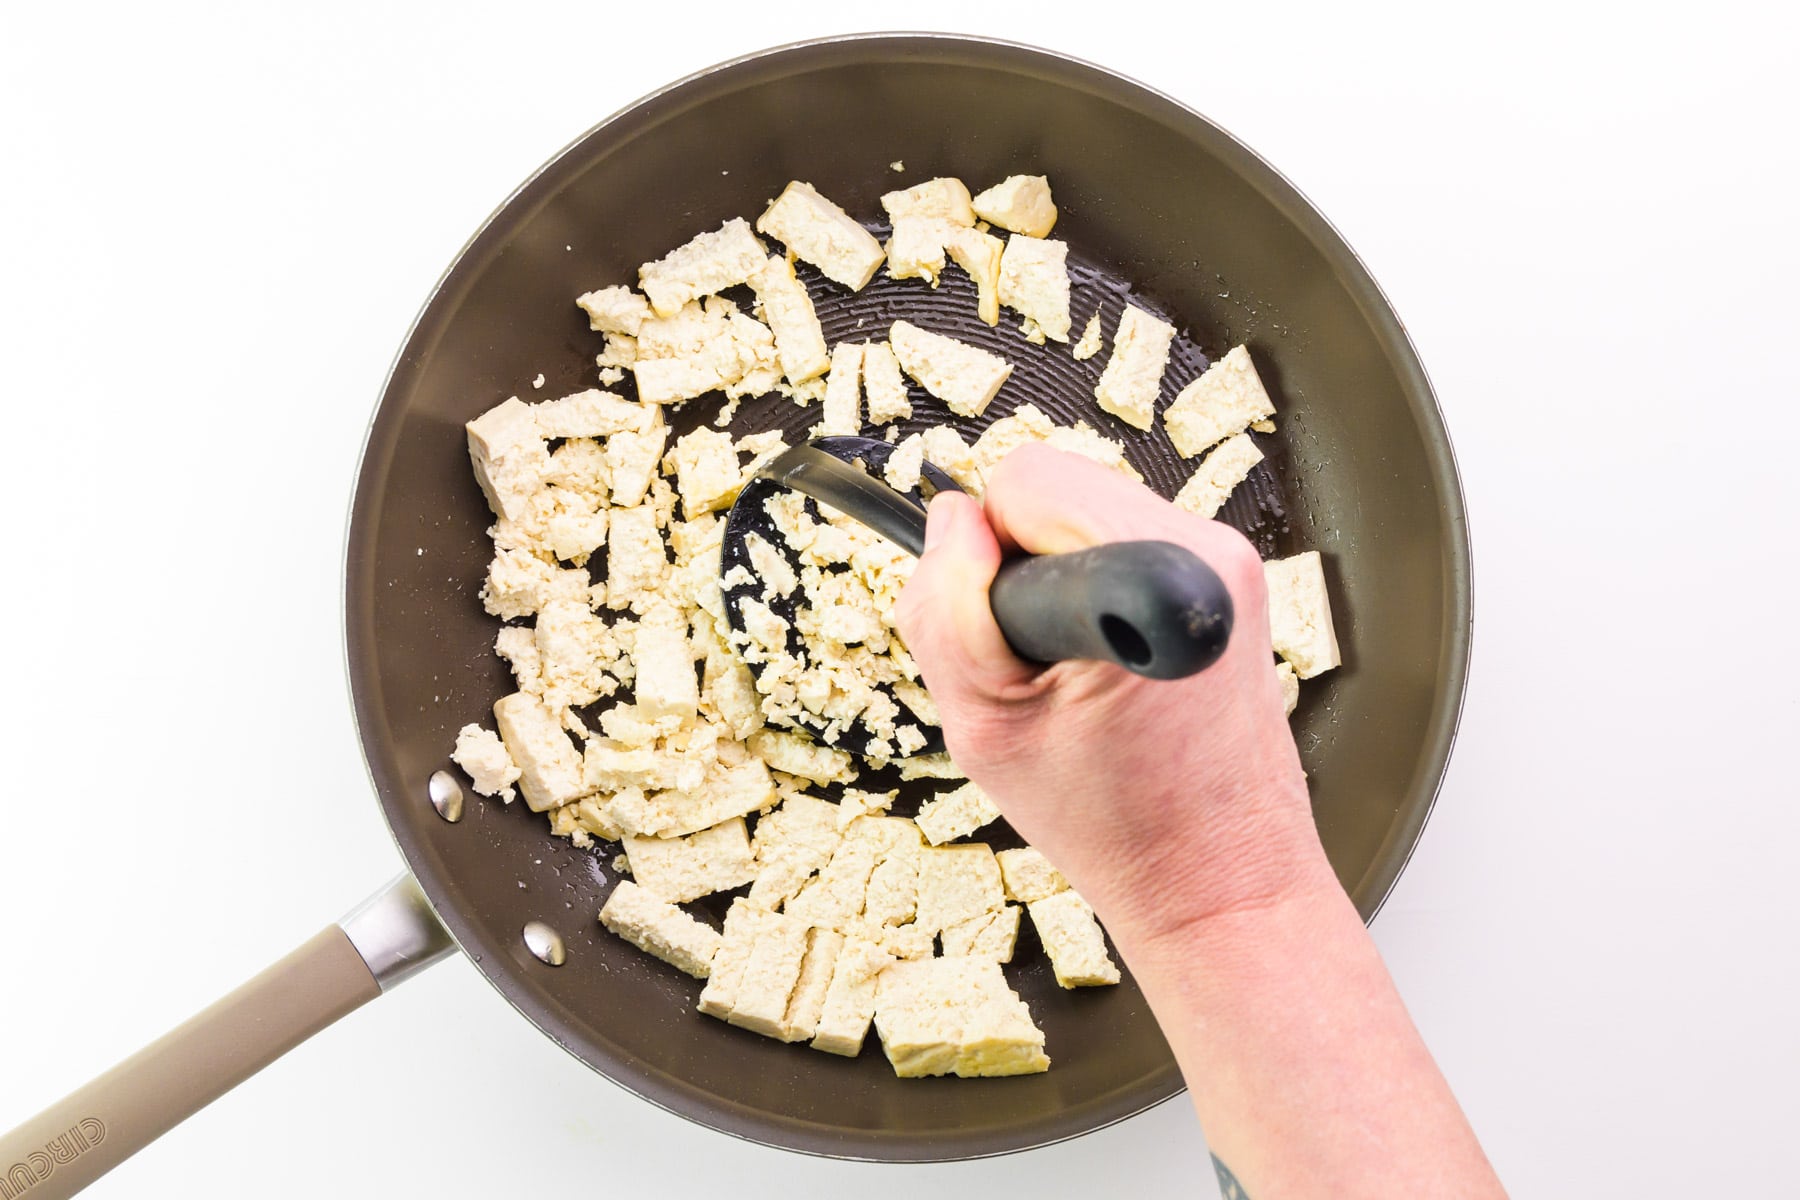 A hand uses a potato masher to mash tofu in a skillet.